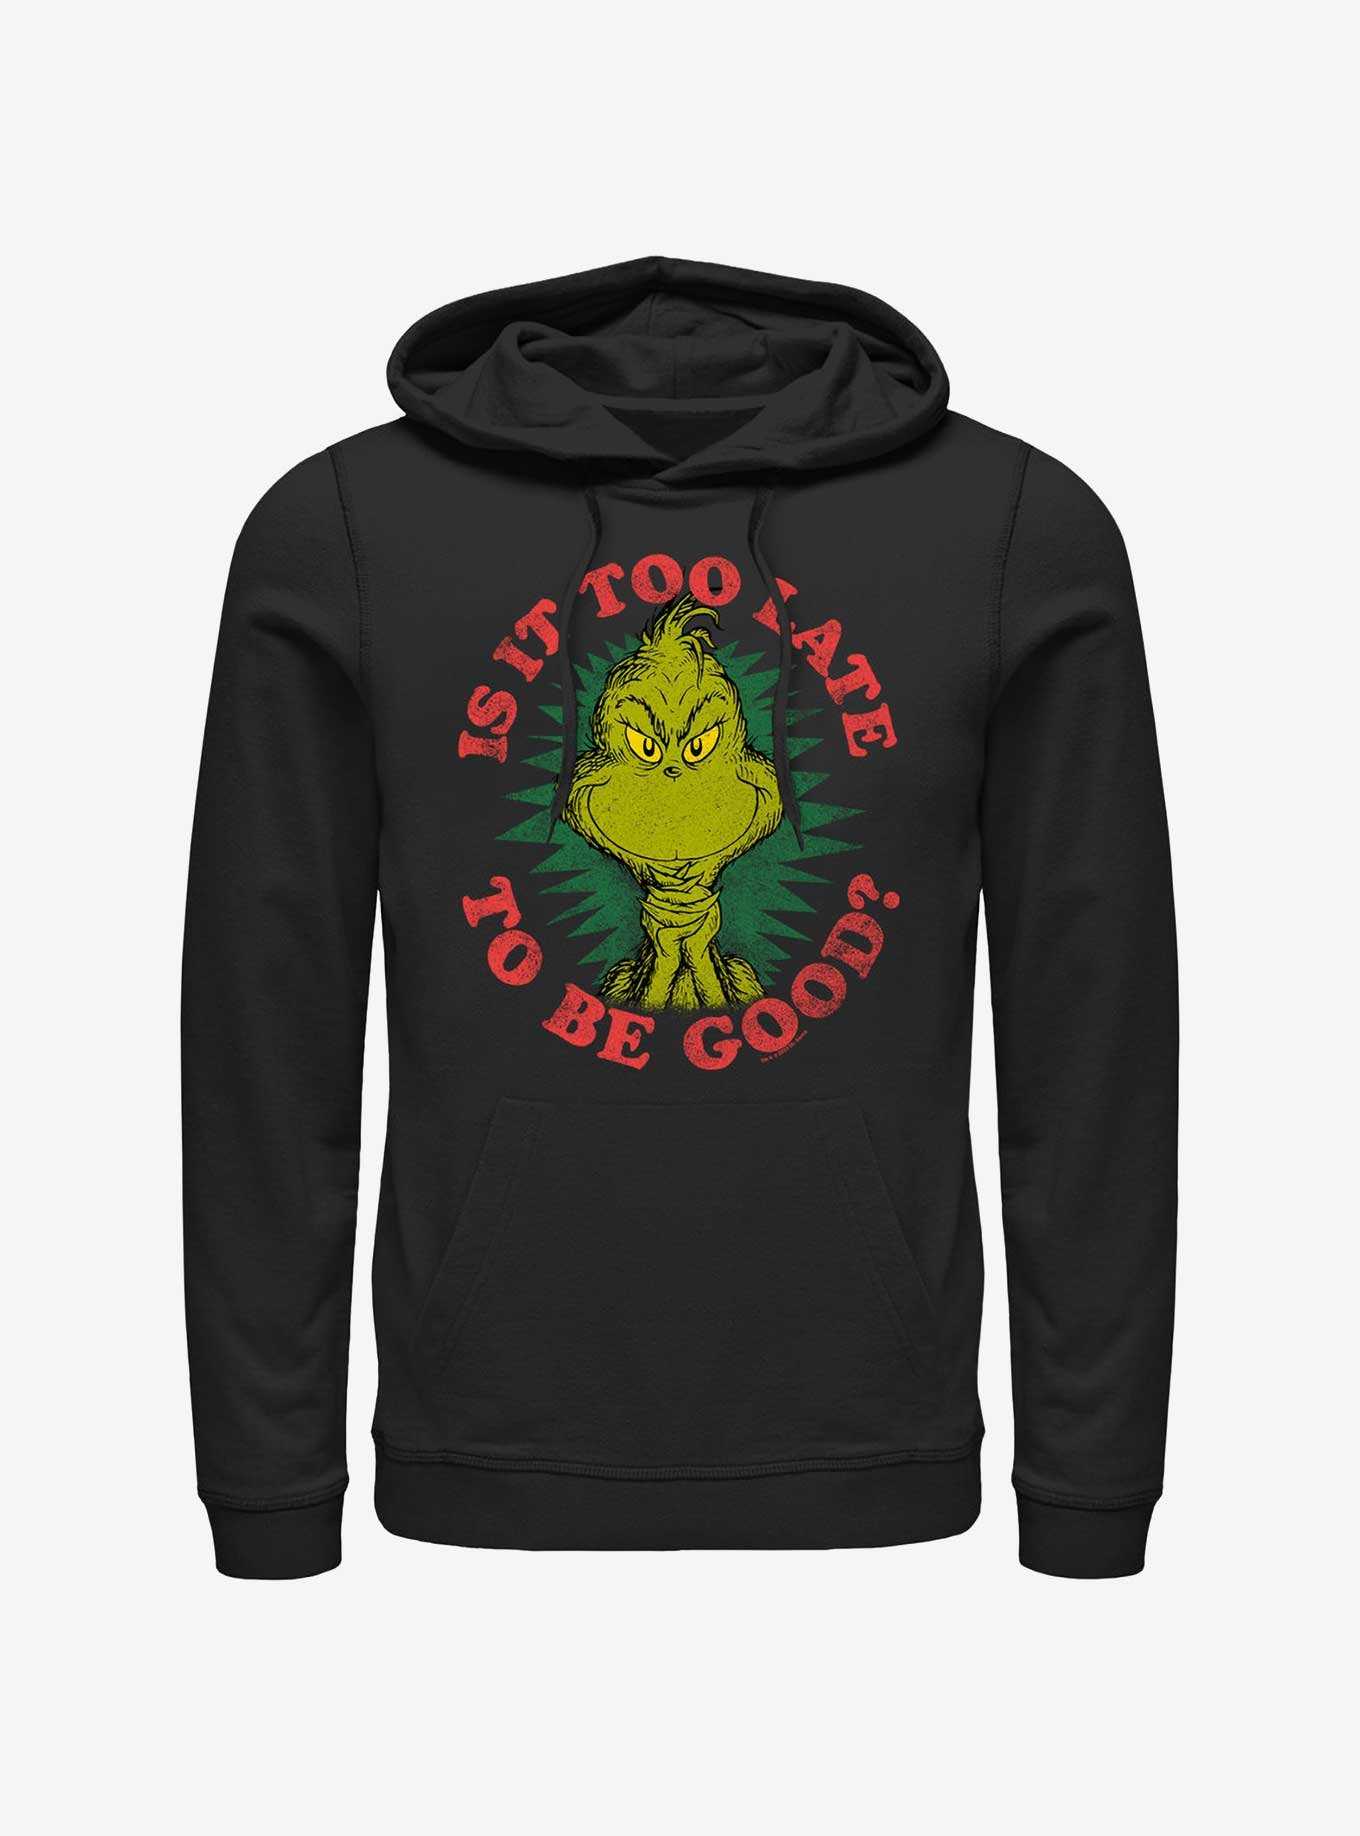 Dr. Seuss Grinch Is It Too Late To Be Good Hoodie, , hi-res